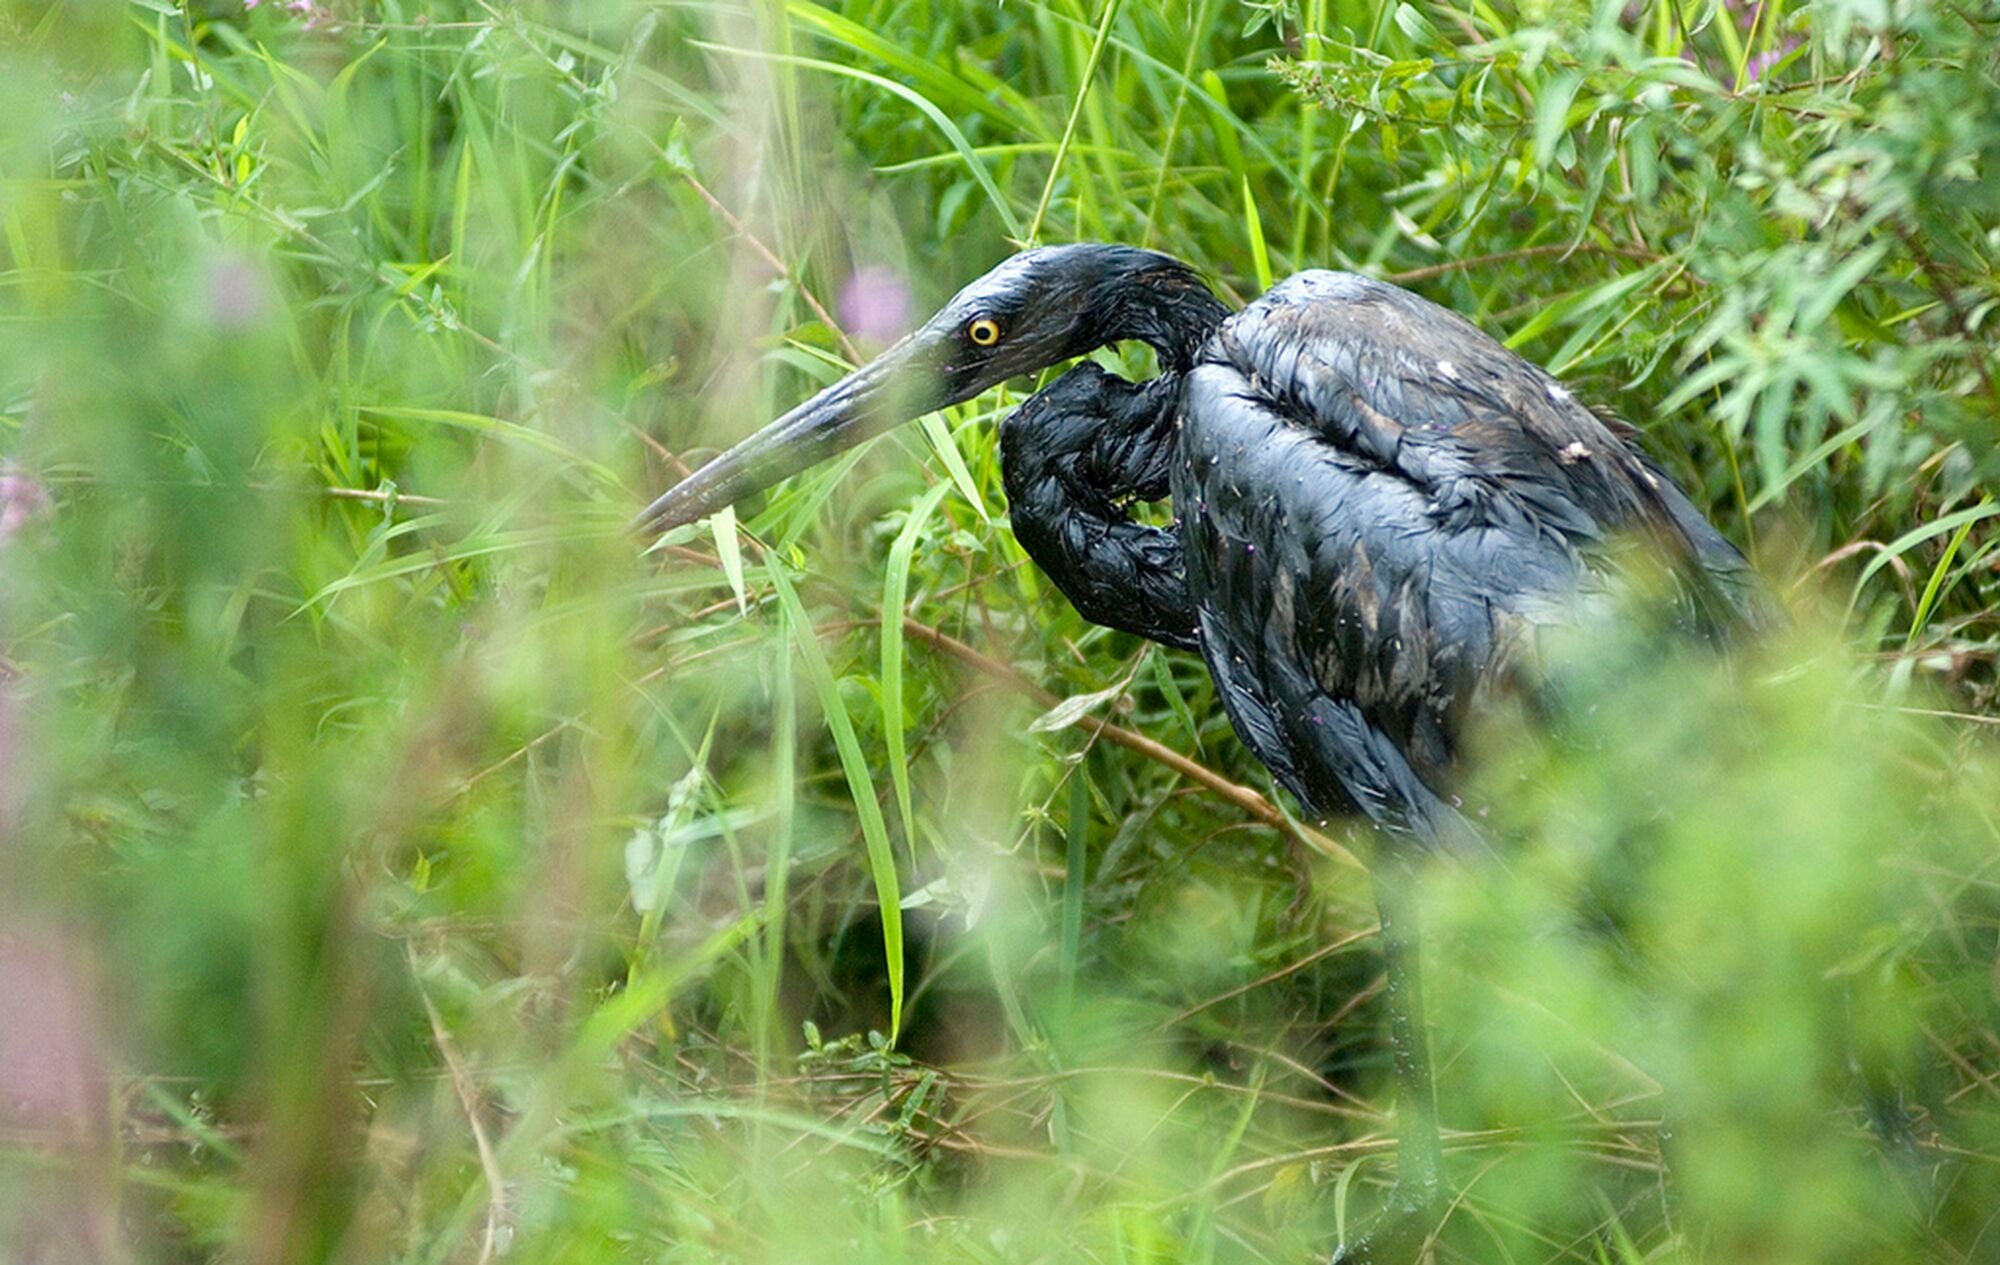 A long-necked bird completely covered in oil sits in tall grass.